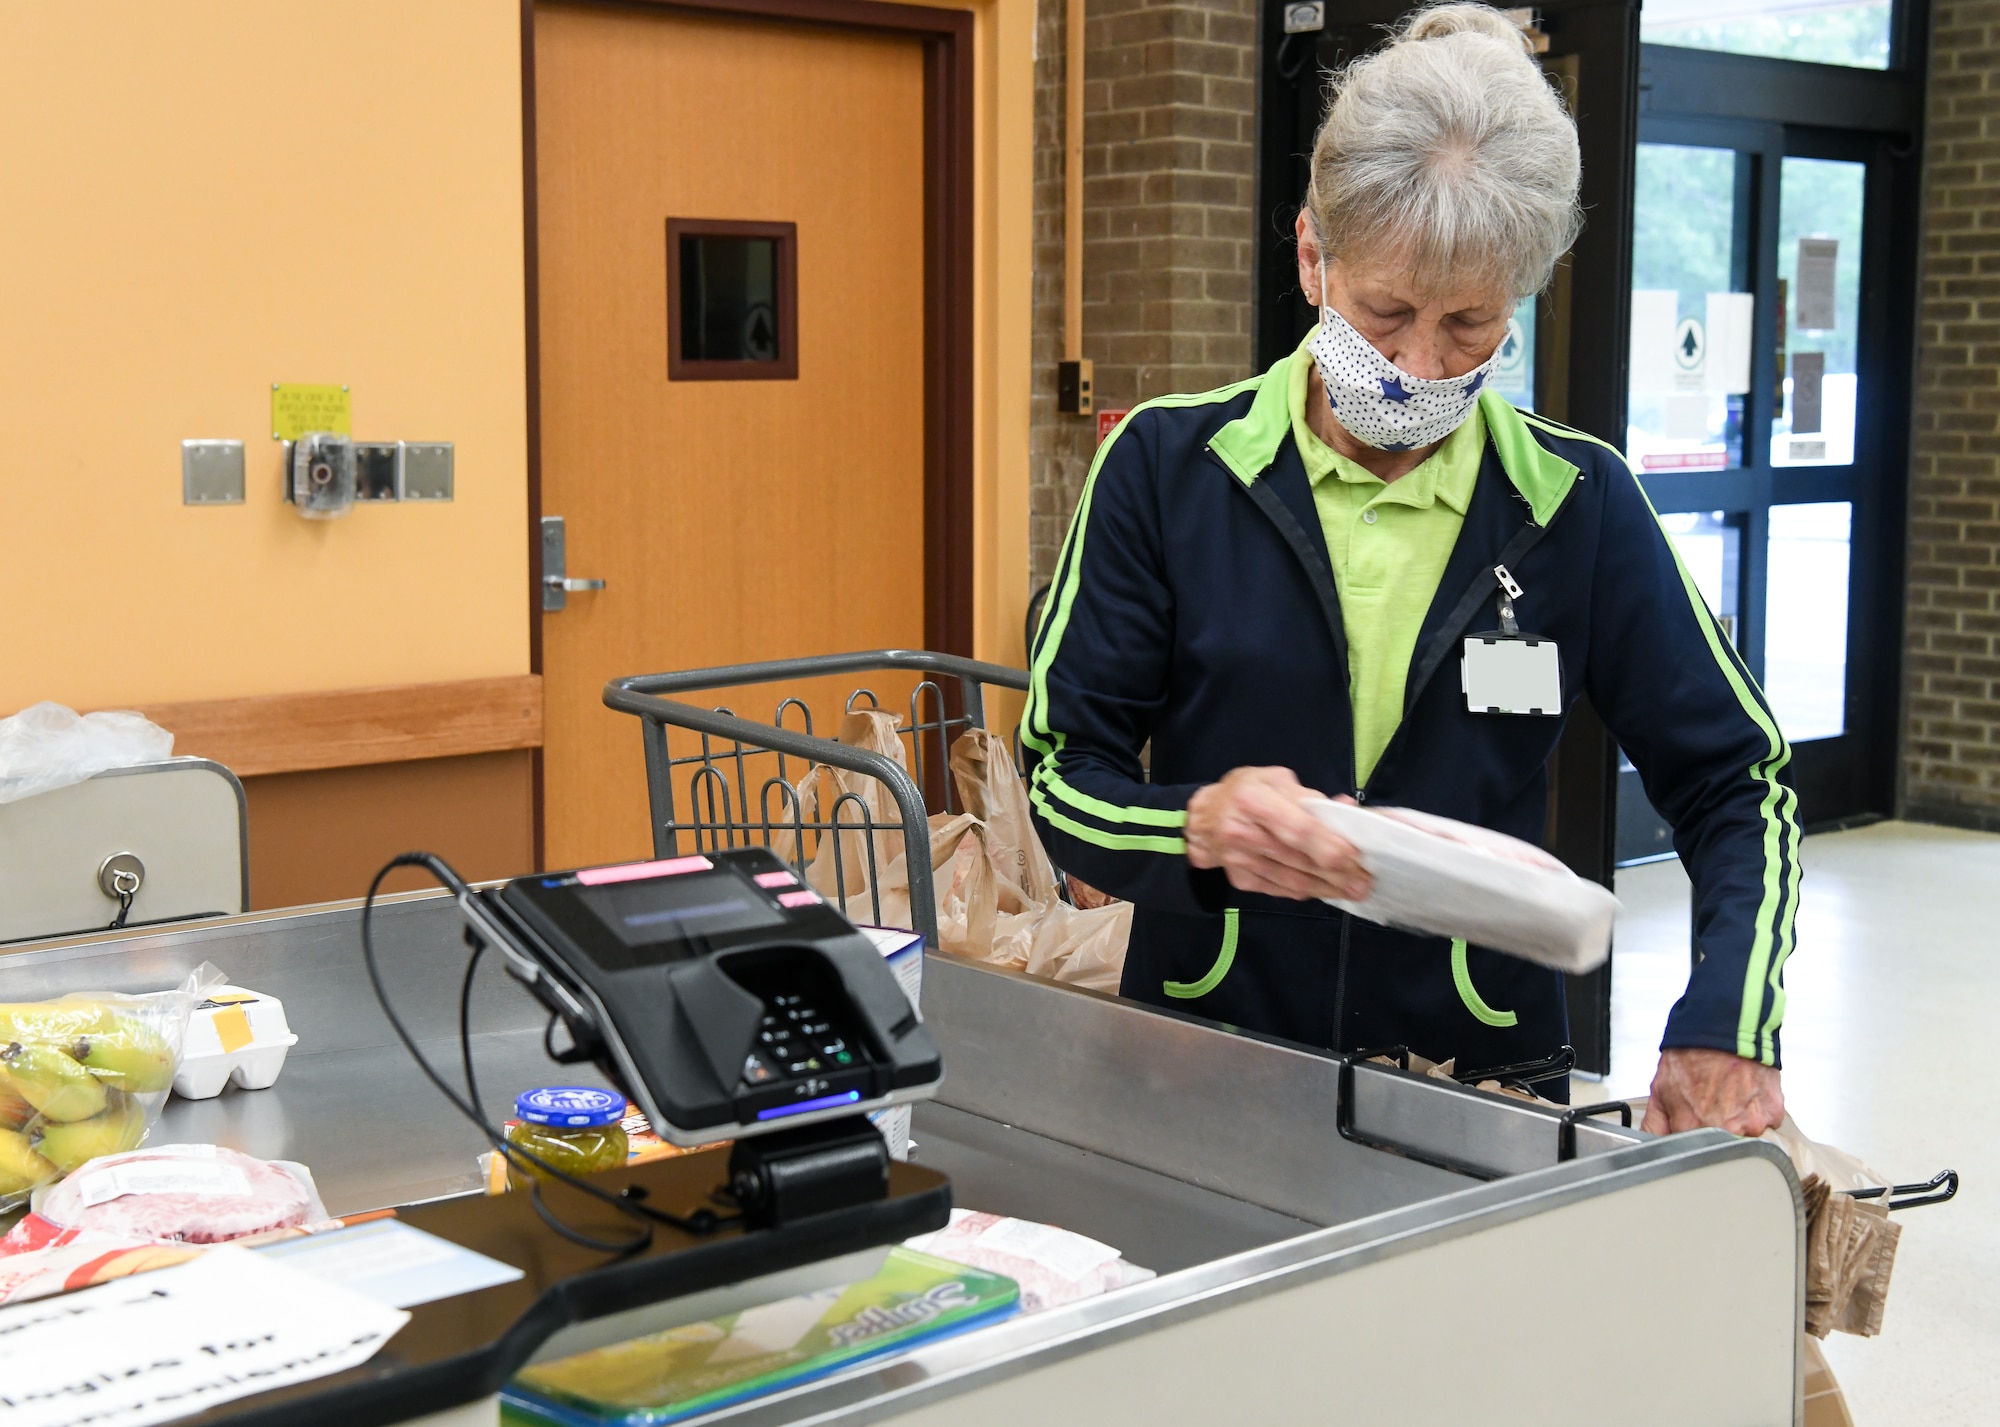 Bagger Mary Cathey bags a customer's purchases, May 5, 2020, at the Arnold Air Force Base Commissary, while taking measures to reduce the risk of coronavirus transmission. The Arnold Air Force Base Commissary and Base Exchange have remained open to serve their customers throughout the coronavirus crisis. (U.S. Air Force photo by Jill Pickett) (This image was altered by obscuring a badge for security purposes.)